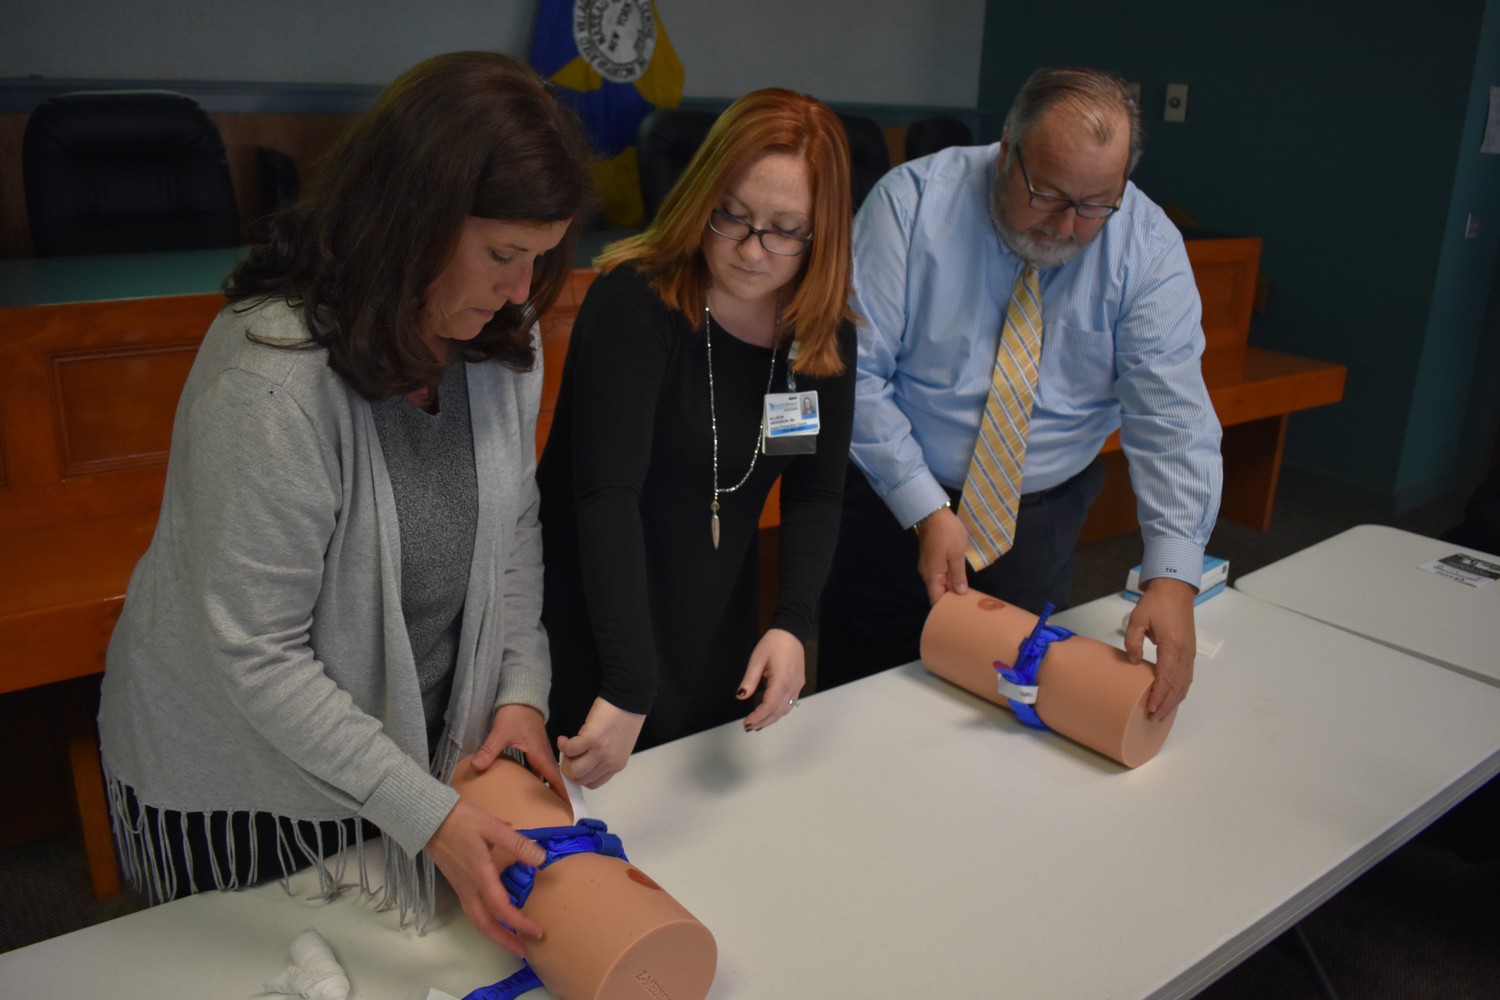 Allison Anderson, center, directed Deputy Mayor Kathy Baxley, left, and Mayor Francis Murray, right, how to stop the bleeding on life-threatening wounds.